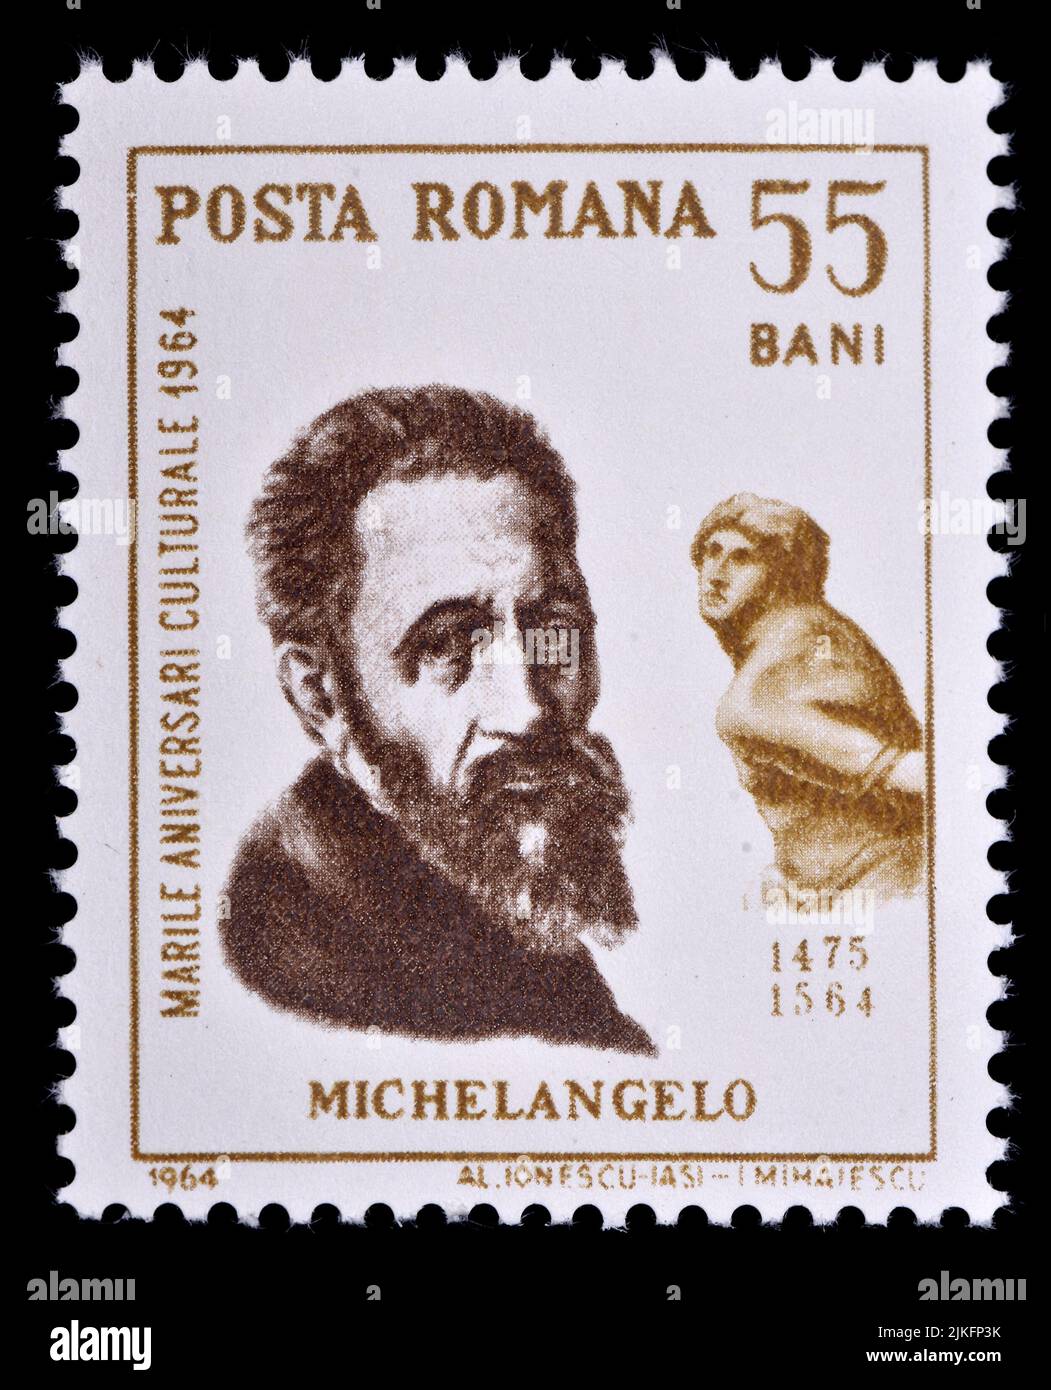 Romanian postage stamp (1964) : Michelangelo (1475-1564), Italian Sculptor and Painter Stock Photo